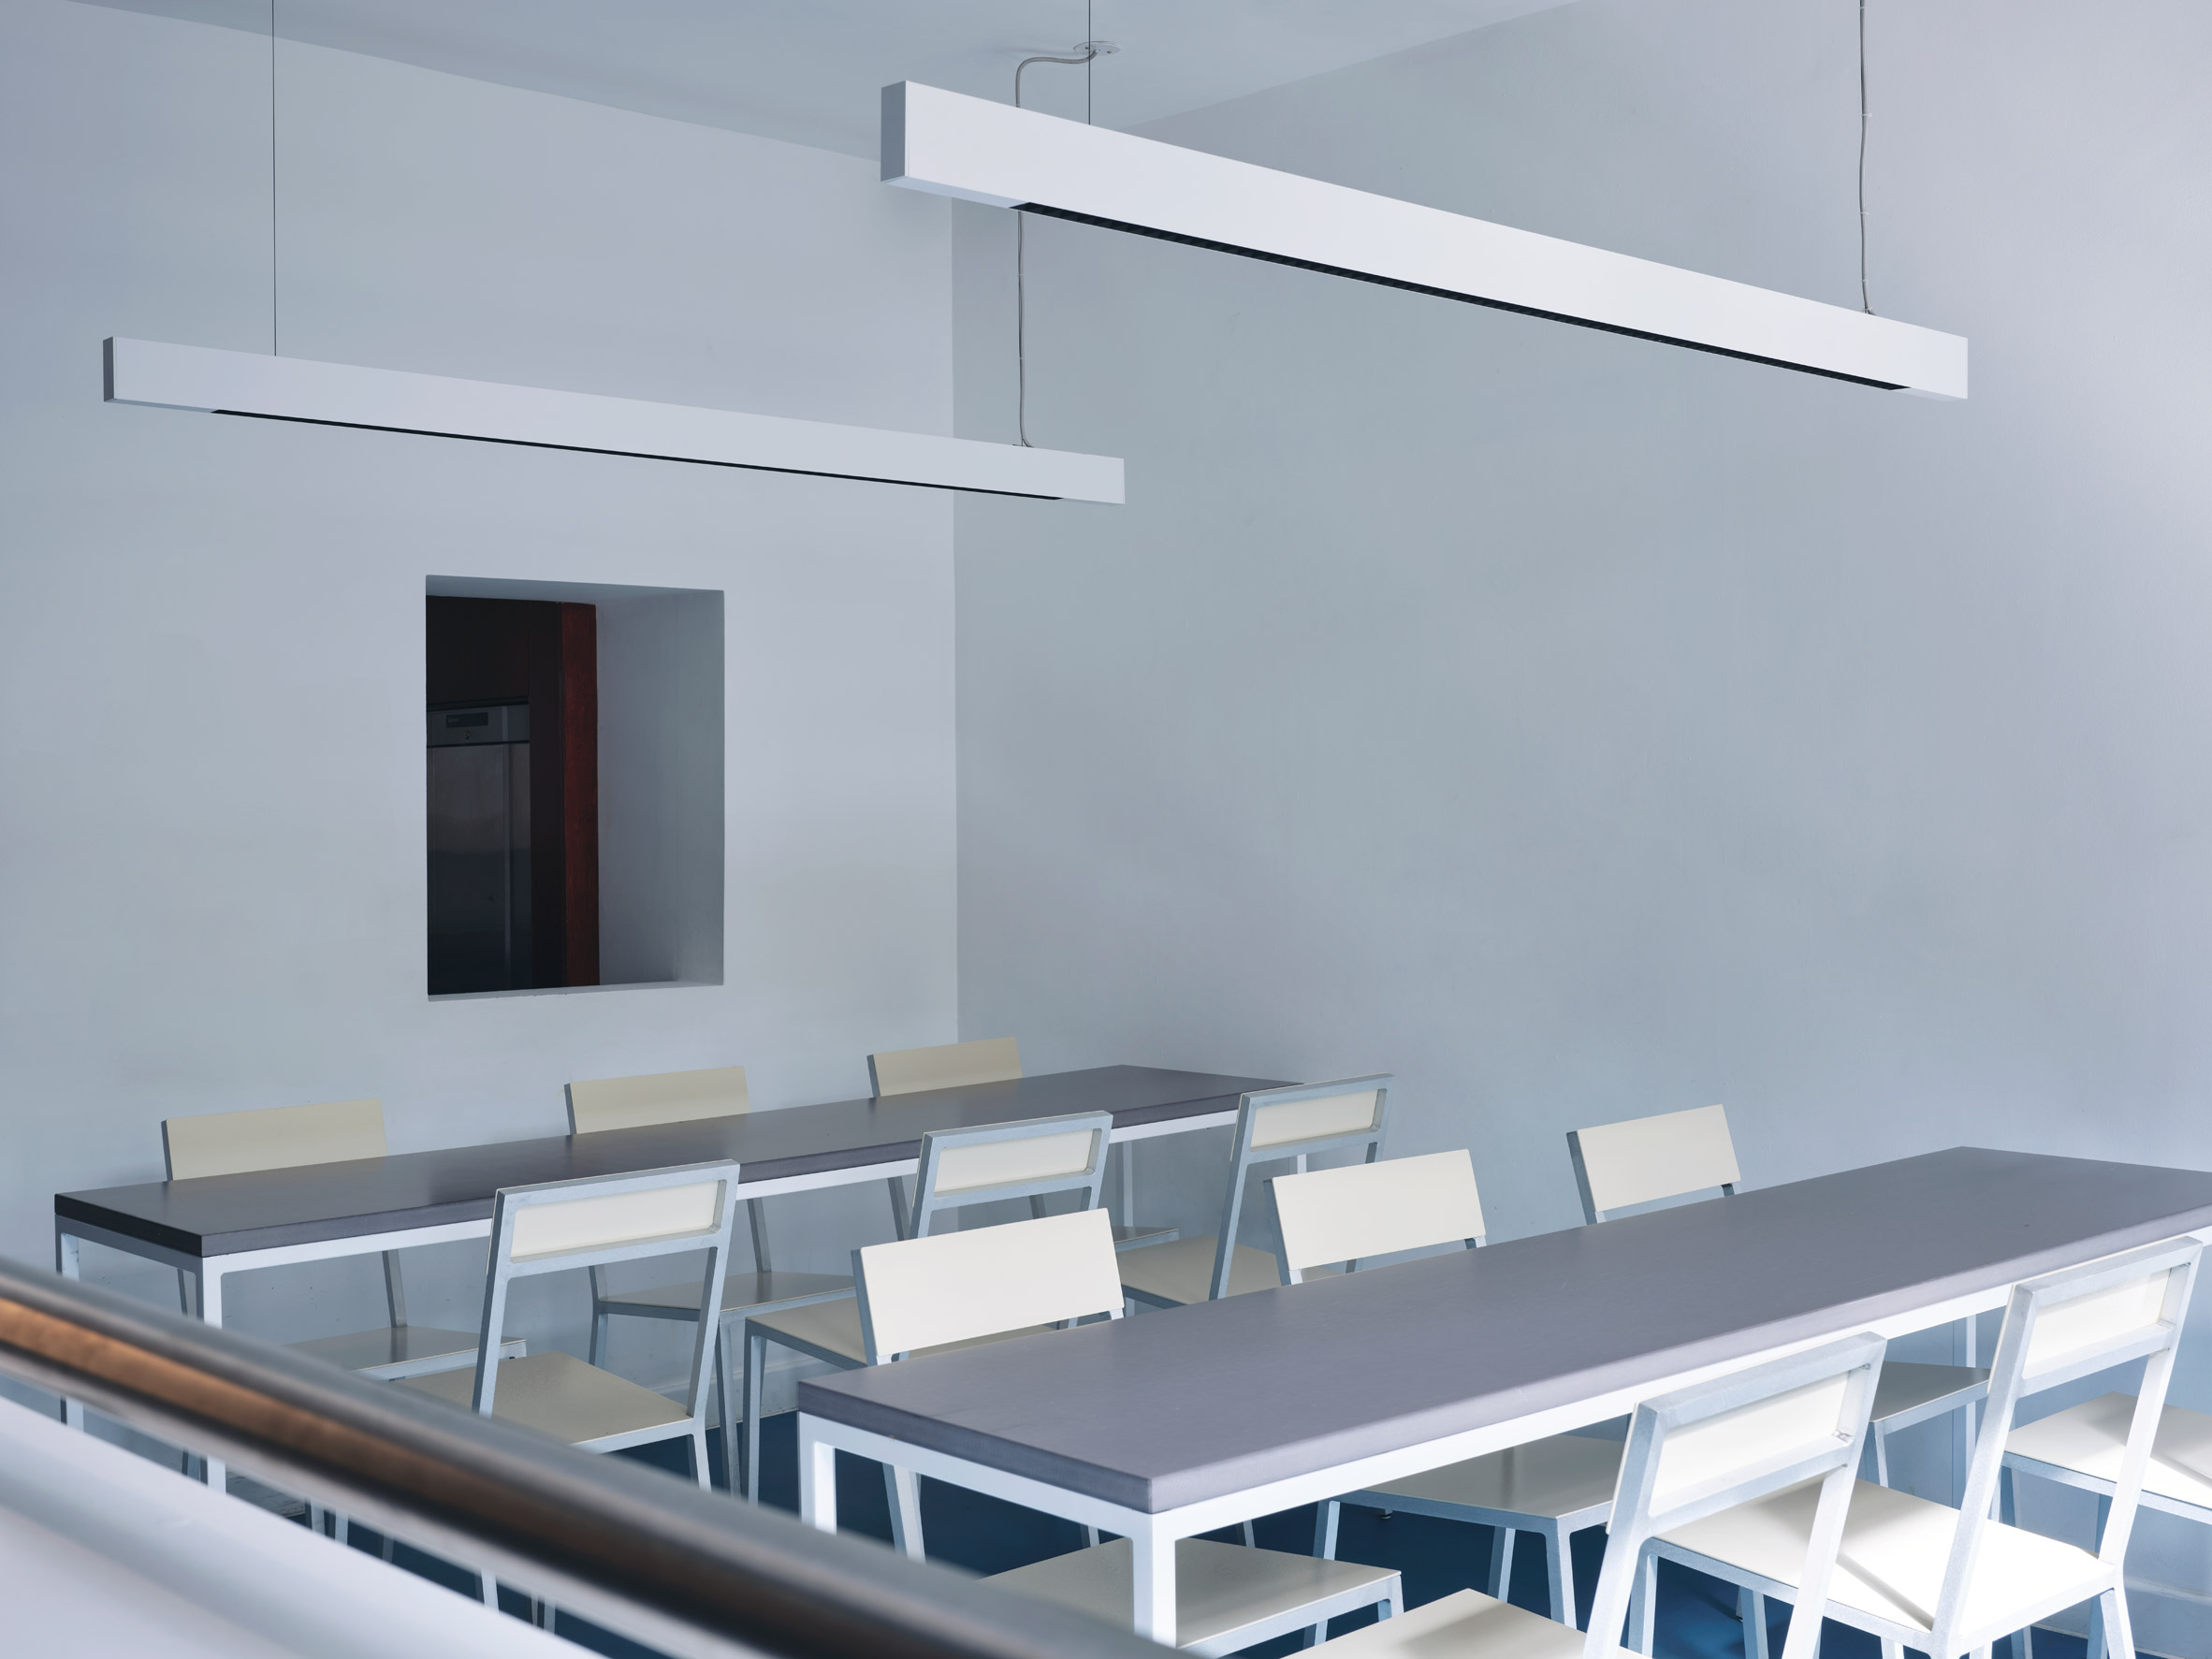 Steel-framed tables in the classroom